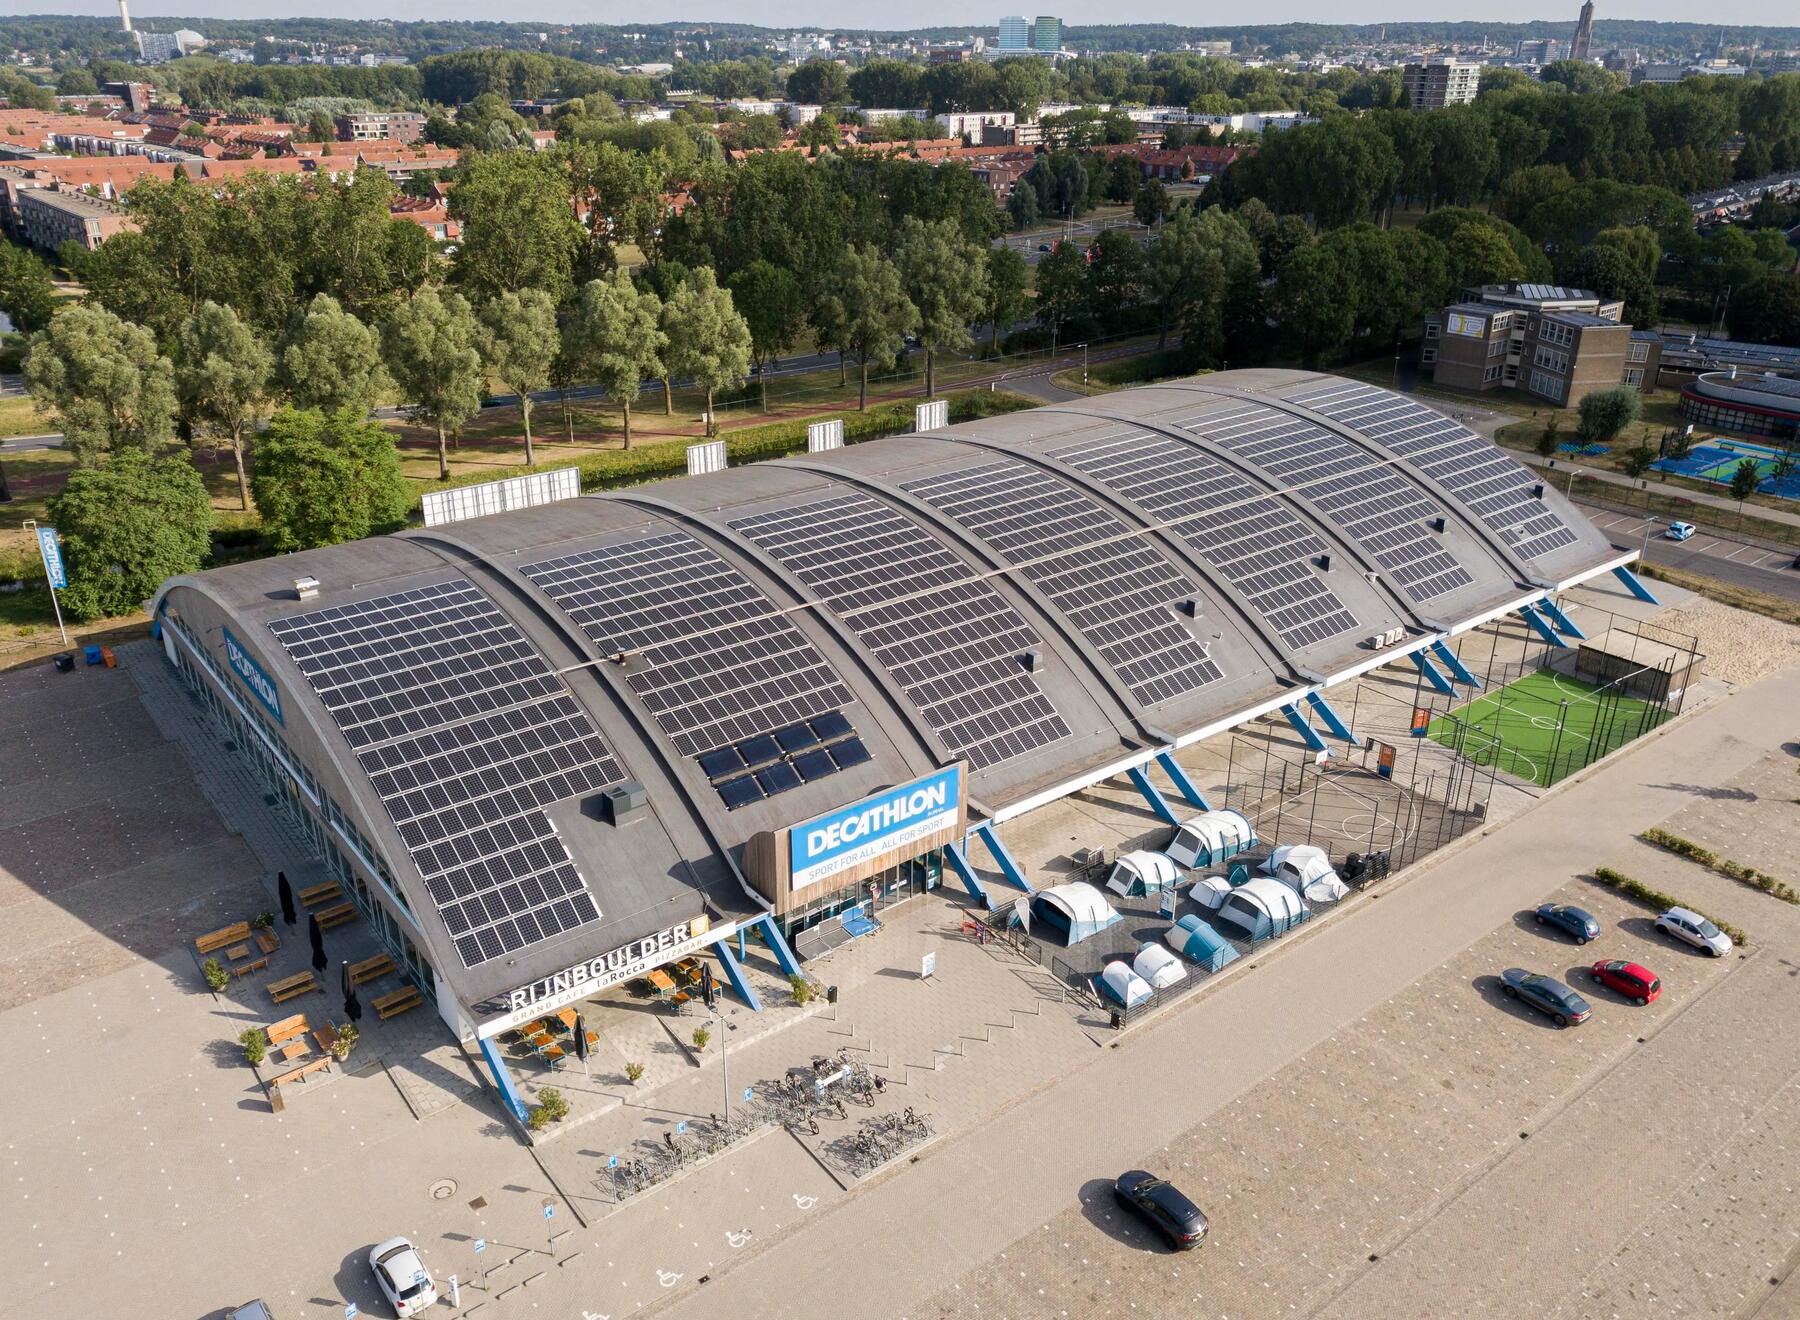 Picture of a Decathlon of a store with solar panels